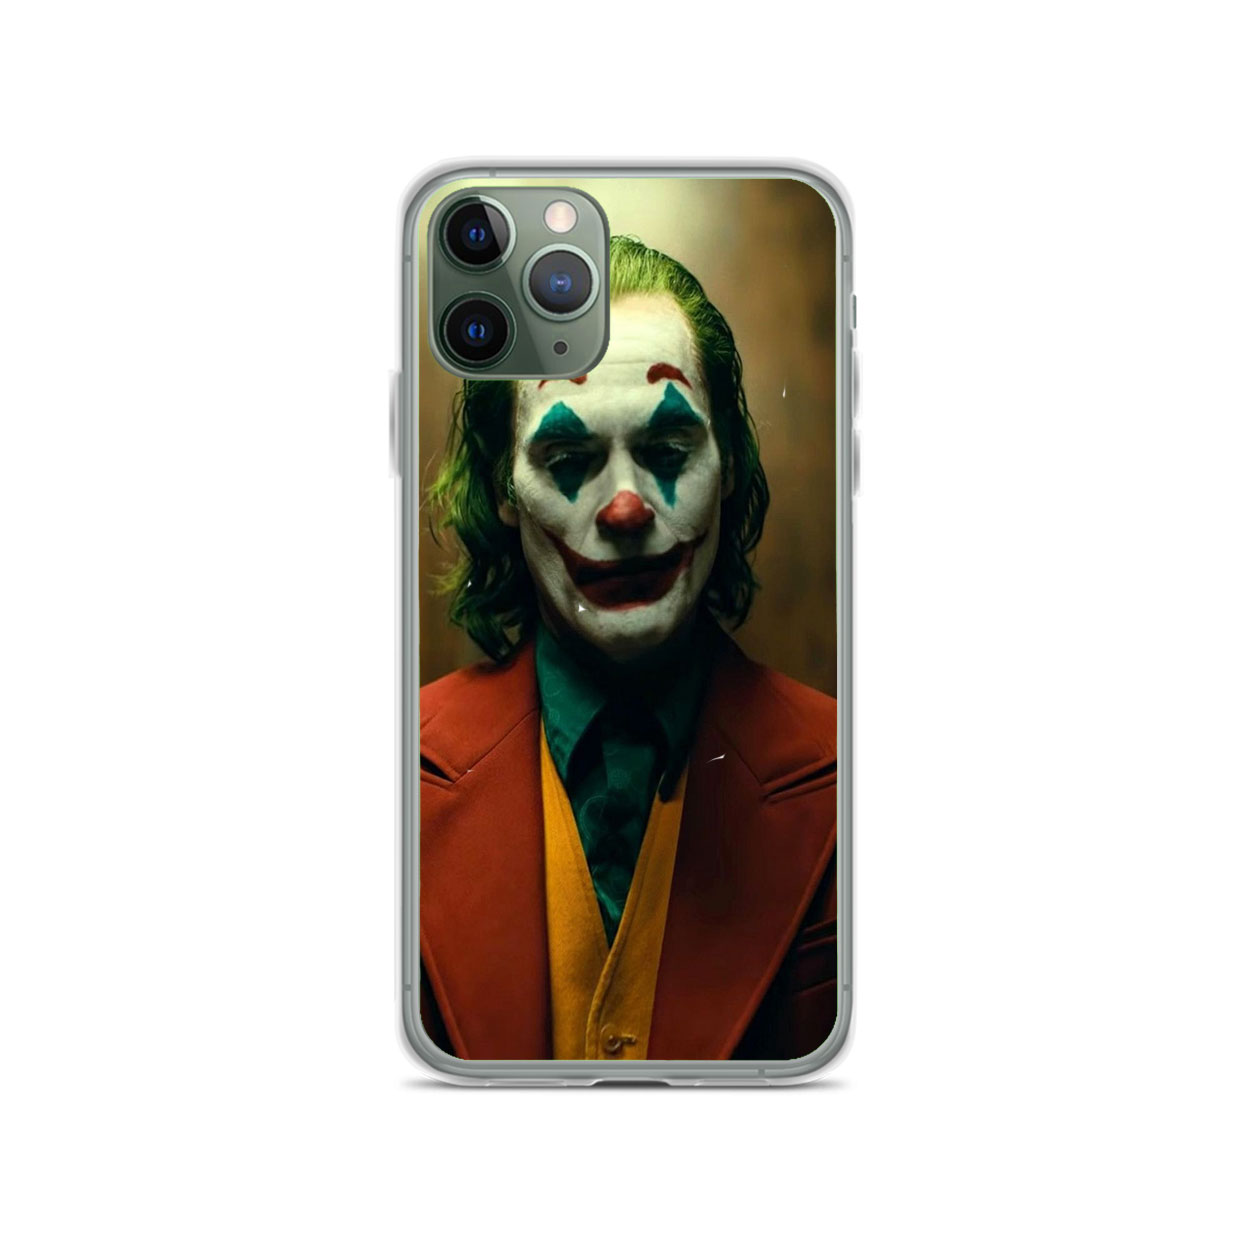 The Joker's Character iPhone Case for XS/XS Max,XR,X,8/8 Plus,7/7Plus,6/6S